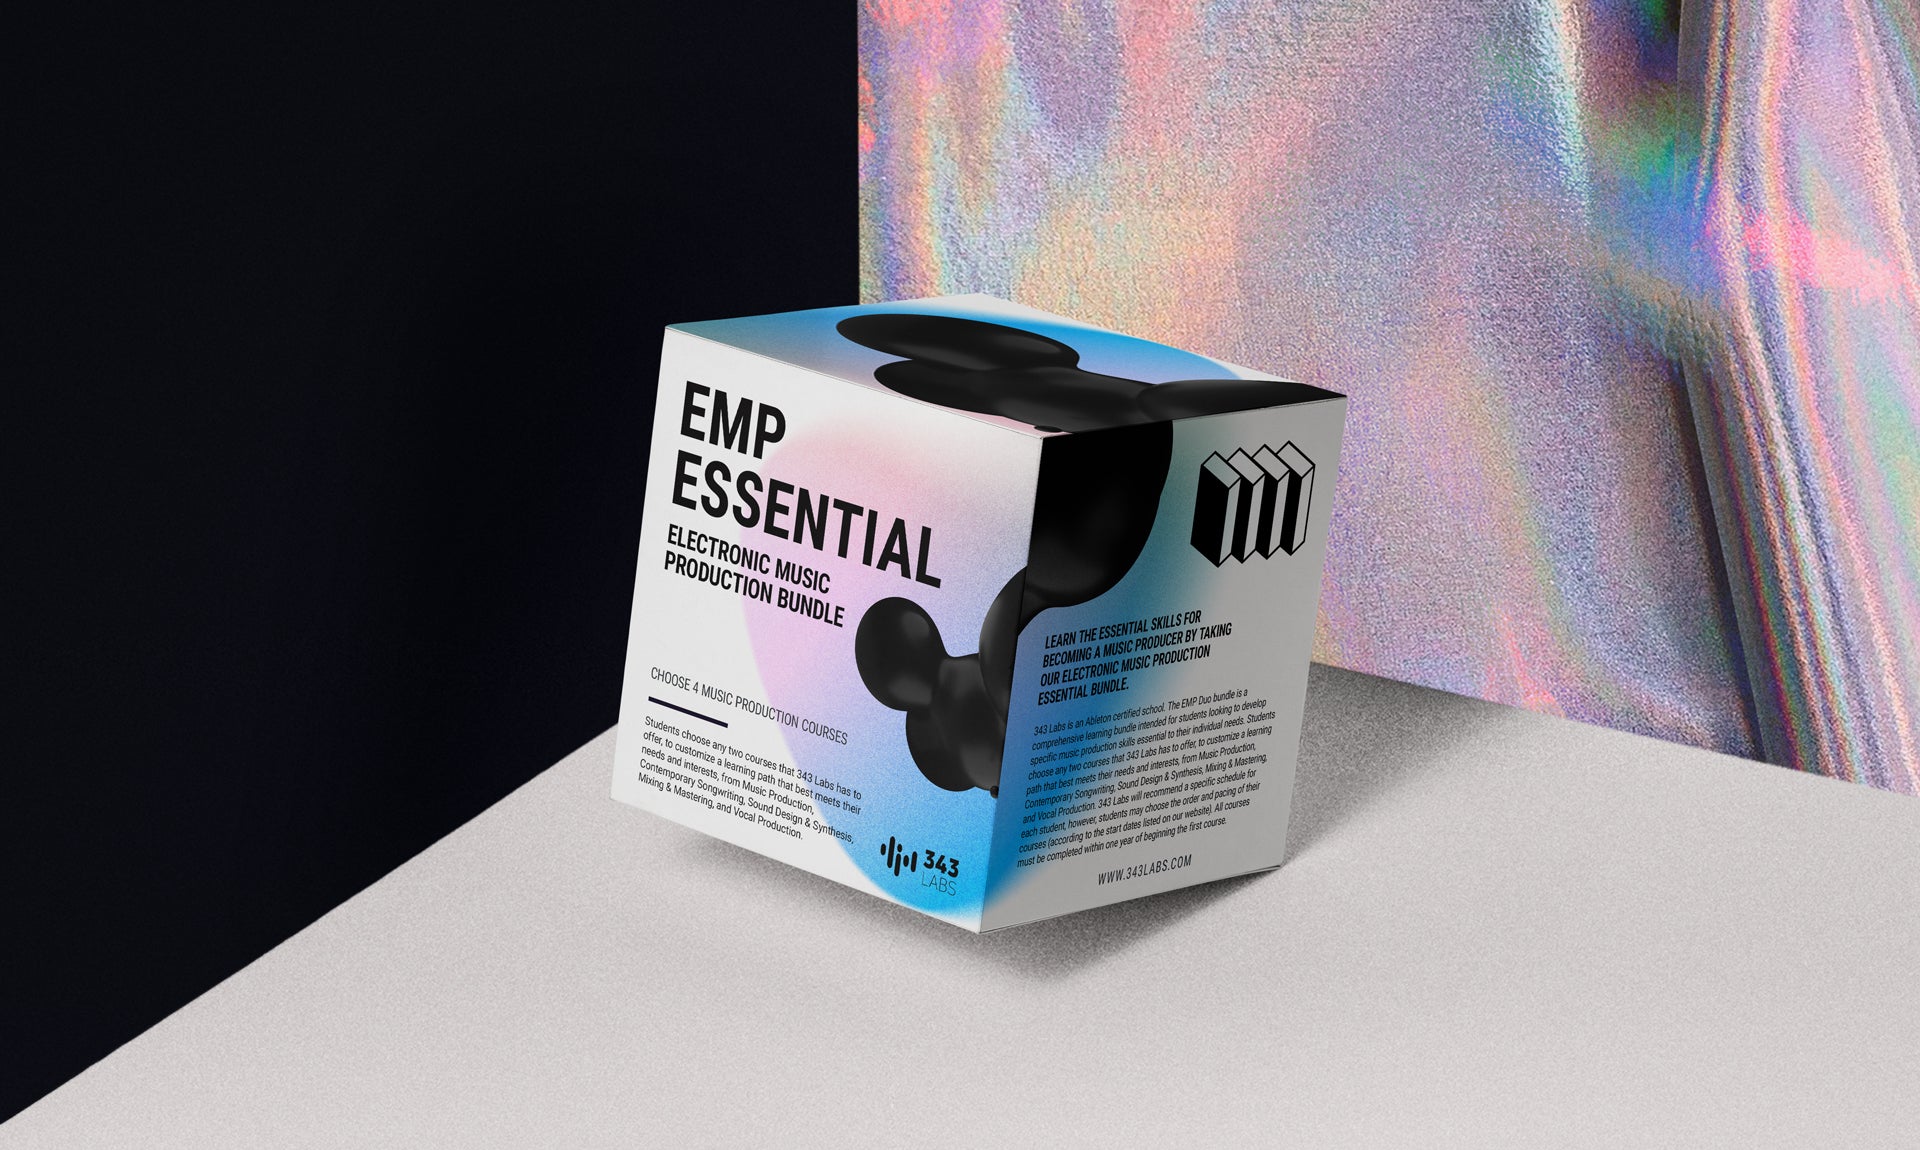 Electronic Music Production Essential Bundle [NYC]